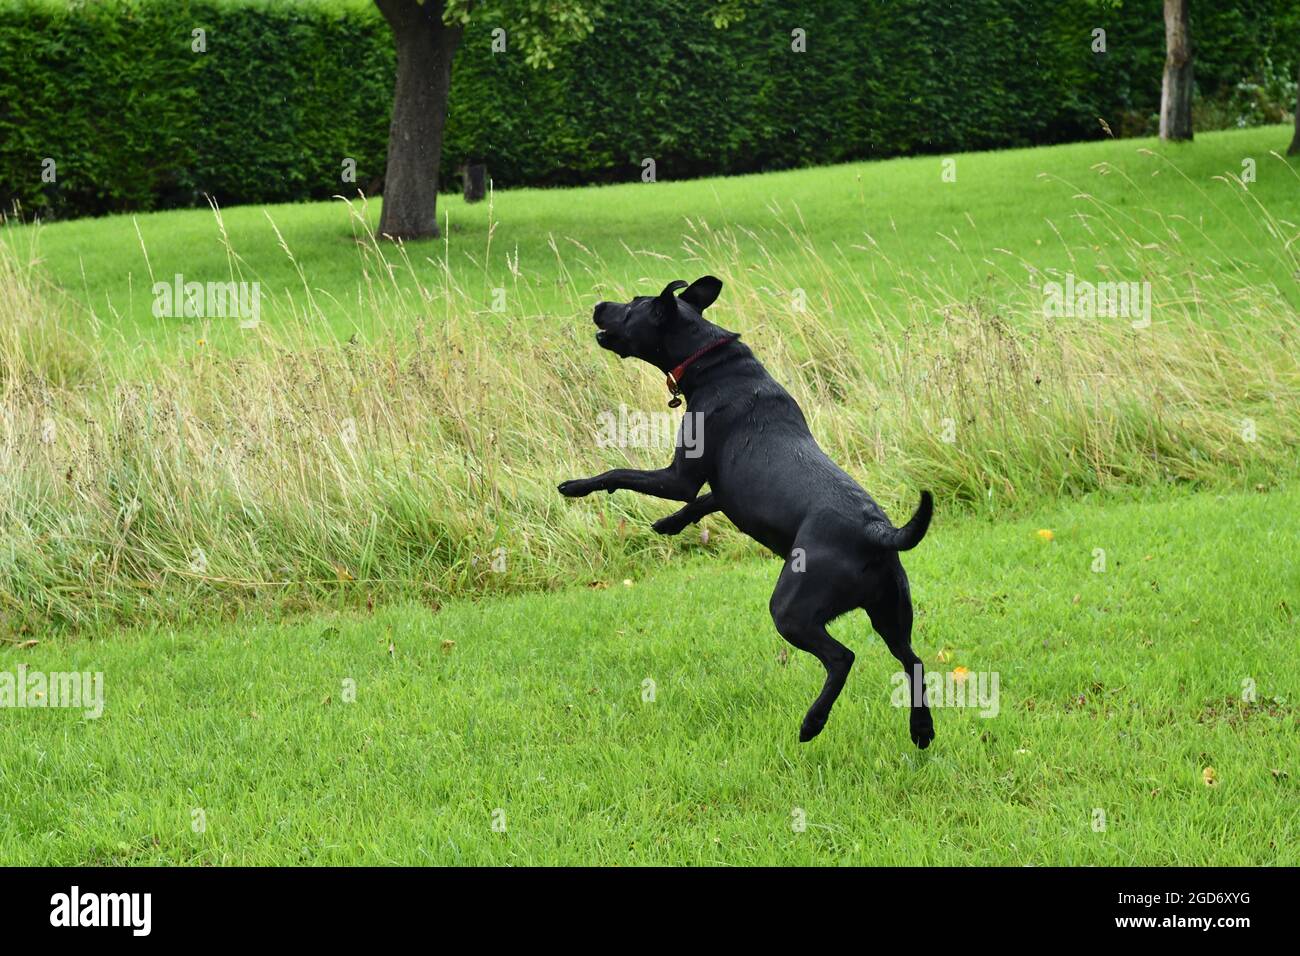 A black Labrador jumping in mid air catching a toy on a English Summers morning Stock Photo